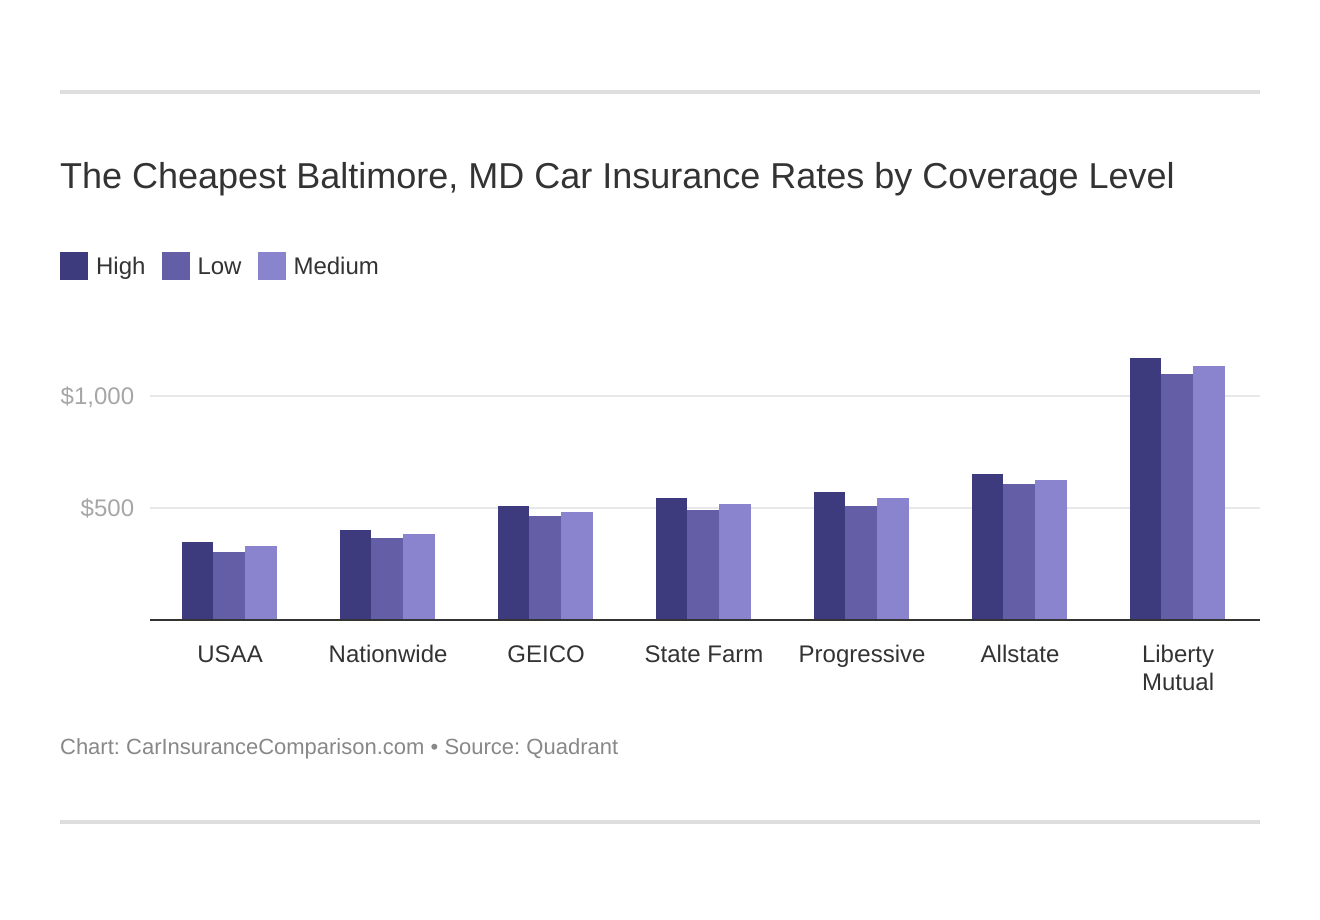 The Cheapest Baltimore, MD Car Insurance Rates by Coverage Level